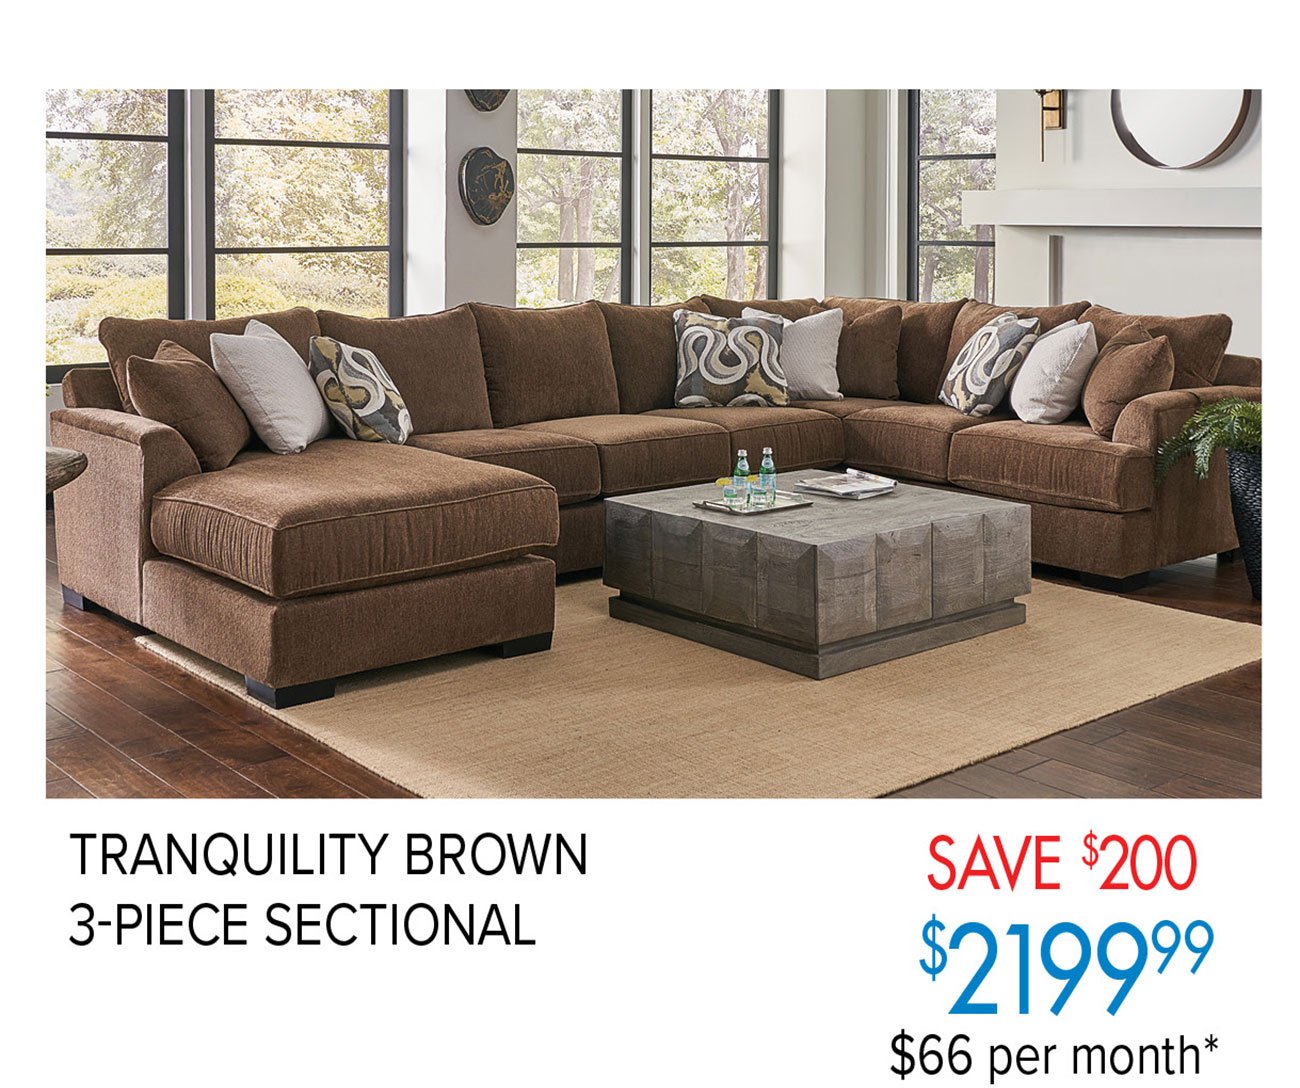  TRANQUILITY BROWN 3-PIECE SECTIONAL $2-9999 $66 per month* 